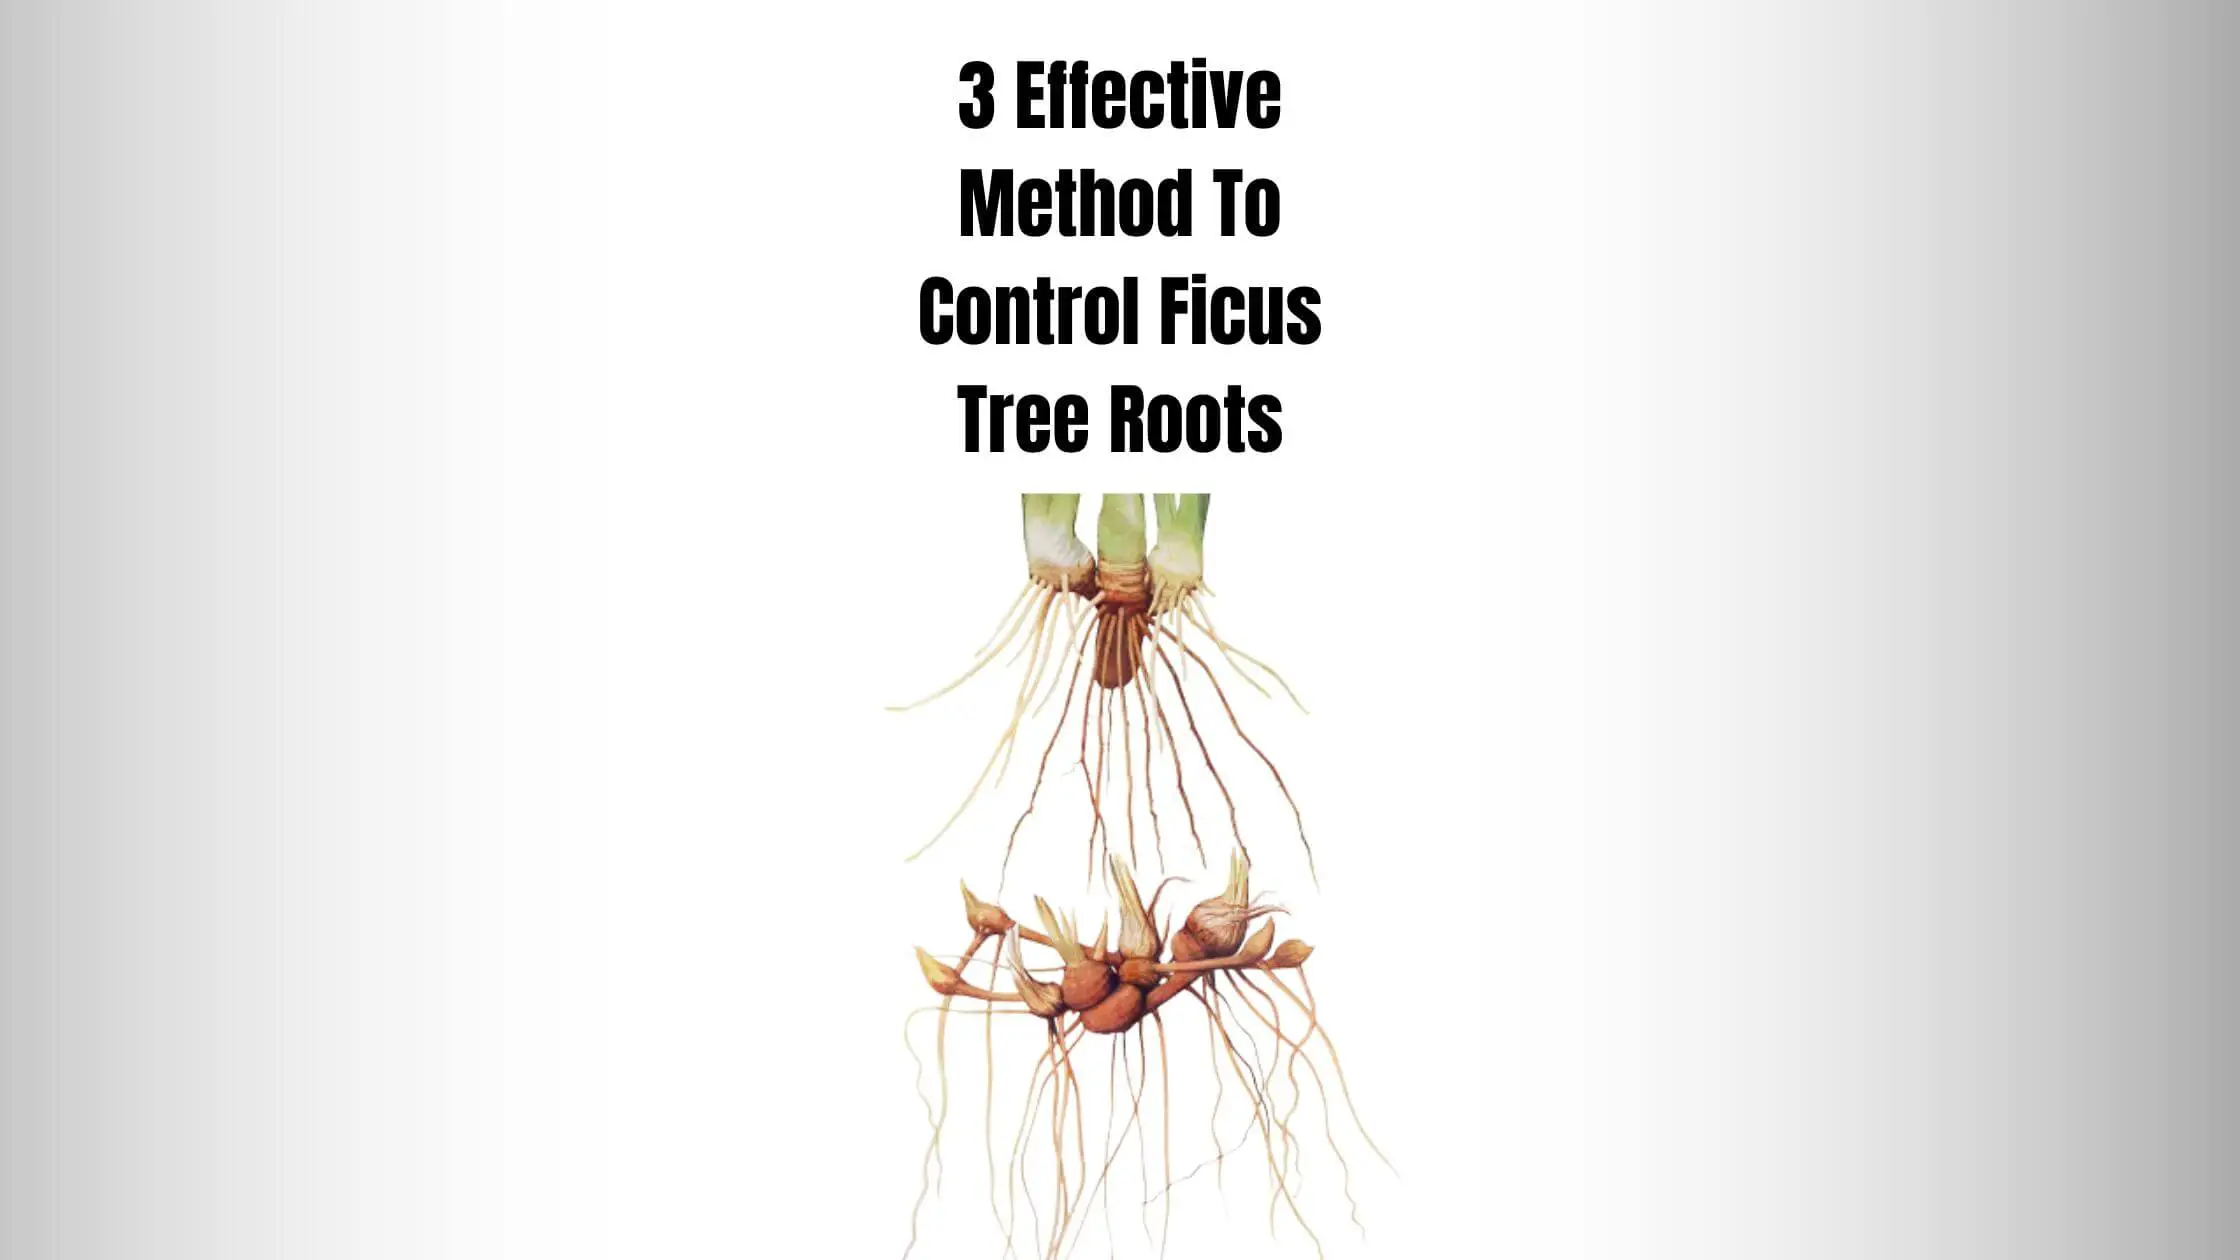 3 Effective Method To Control Ficus Tree Roots